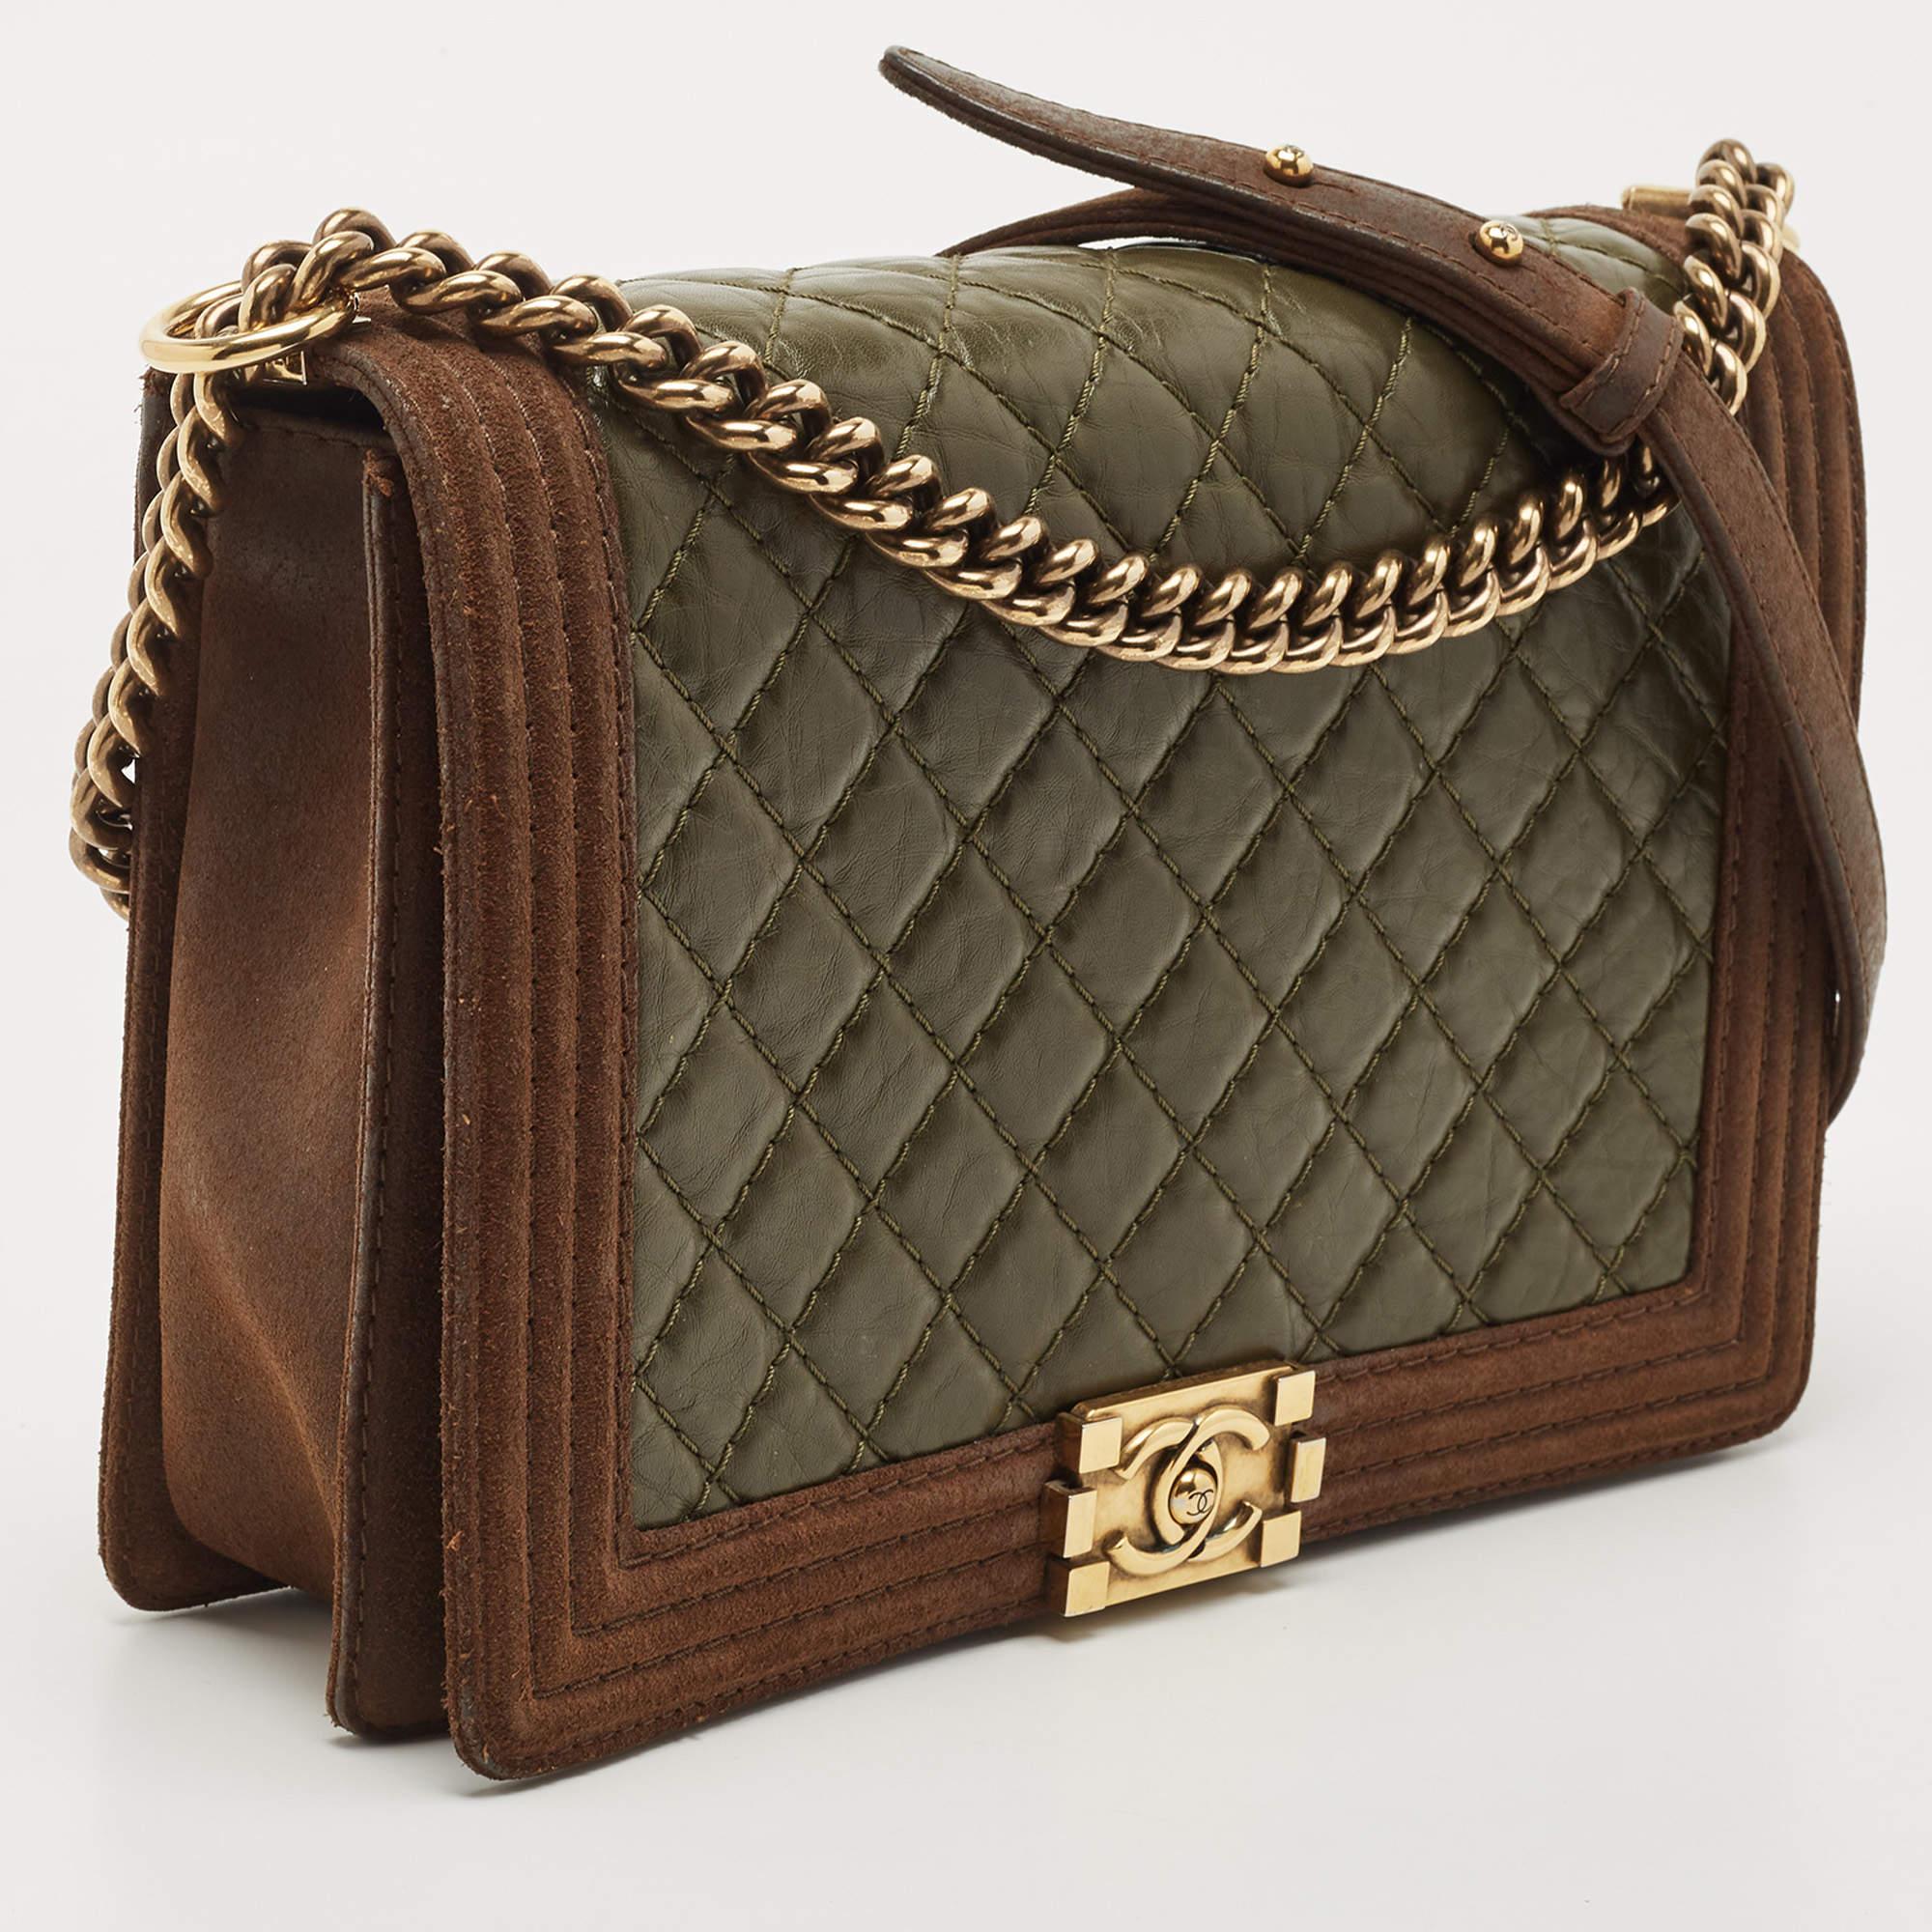 Chanel Brown/Olive Green Quilted Leather Large Paris-Edinburgh Boy Bag In Good Condition For Sale In Dubai, Al Qouz 2